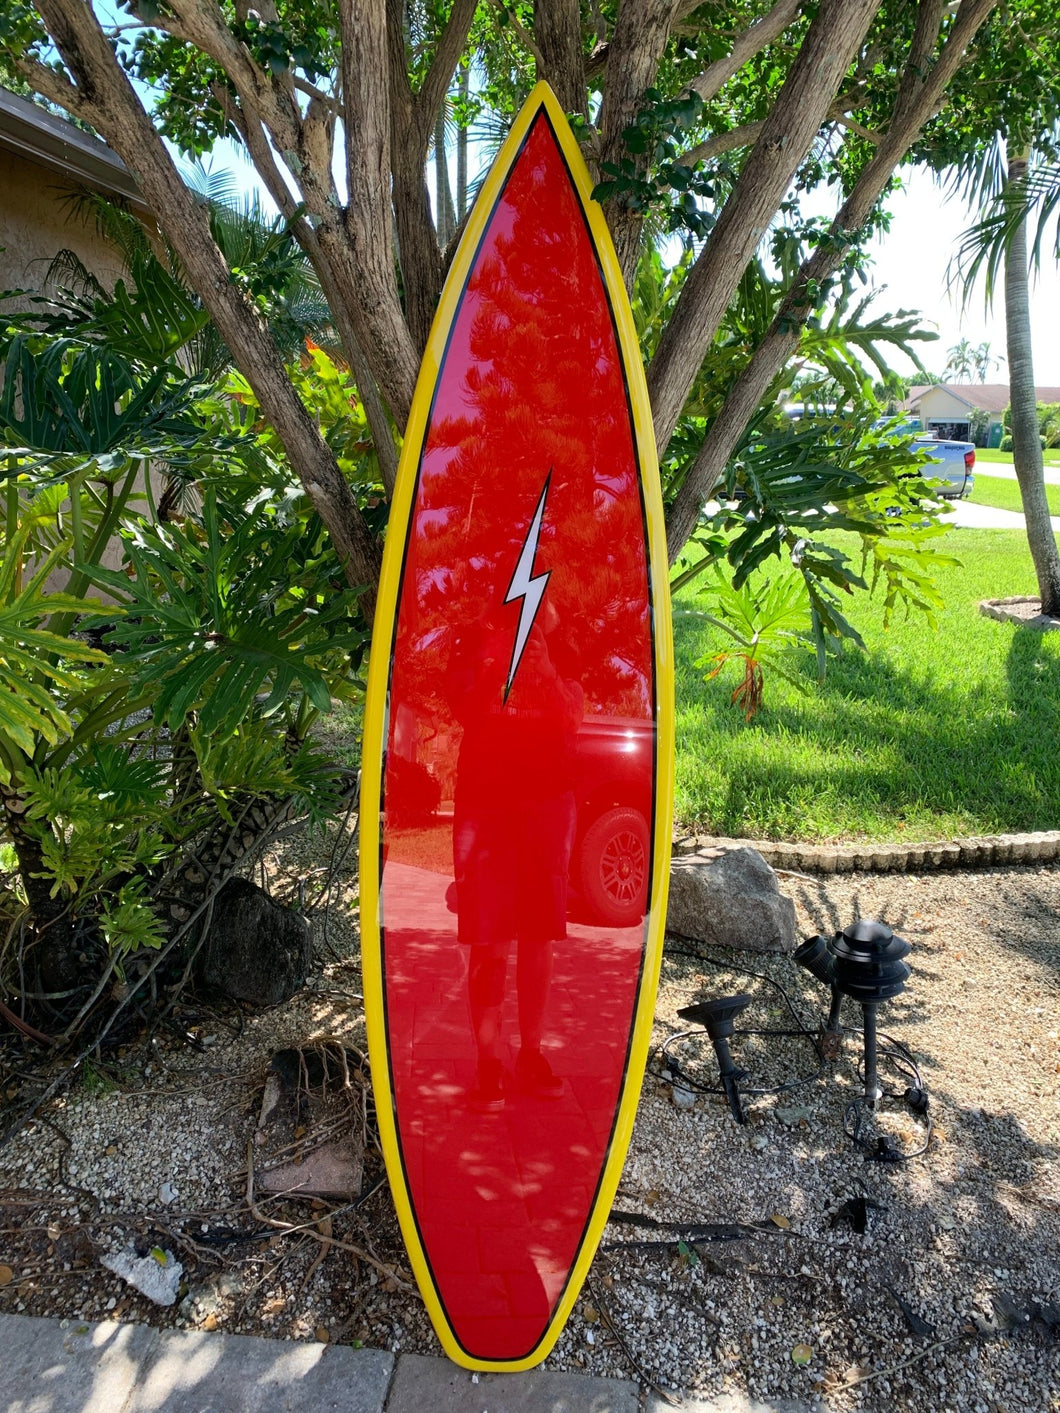 Red Decorative Surfboard